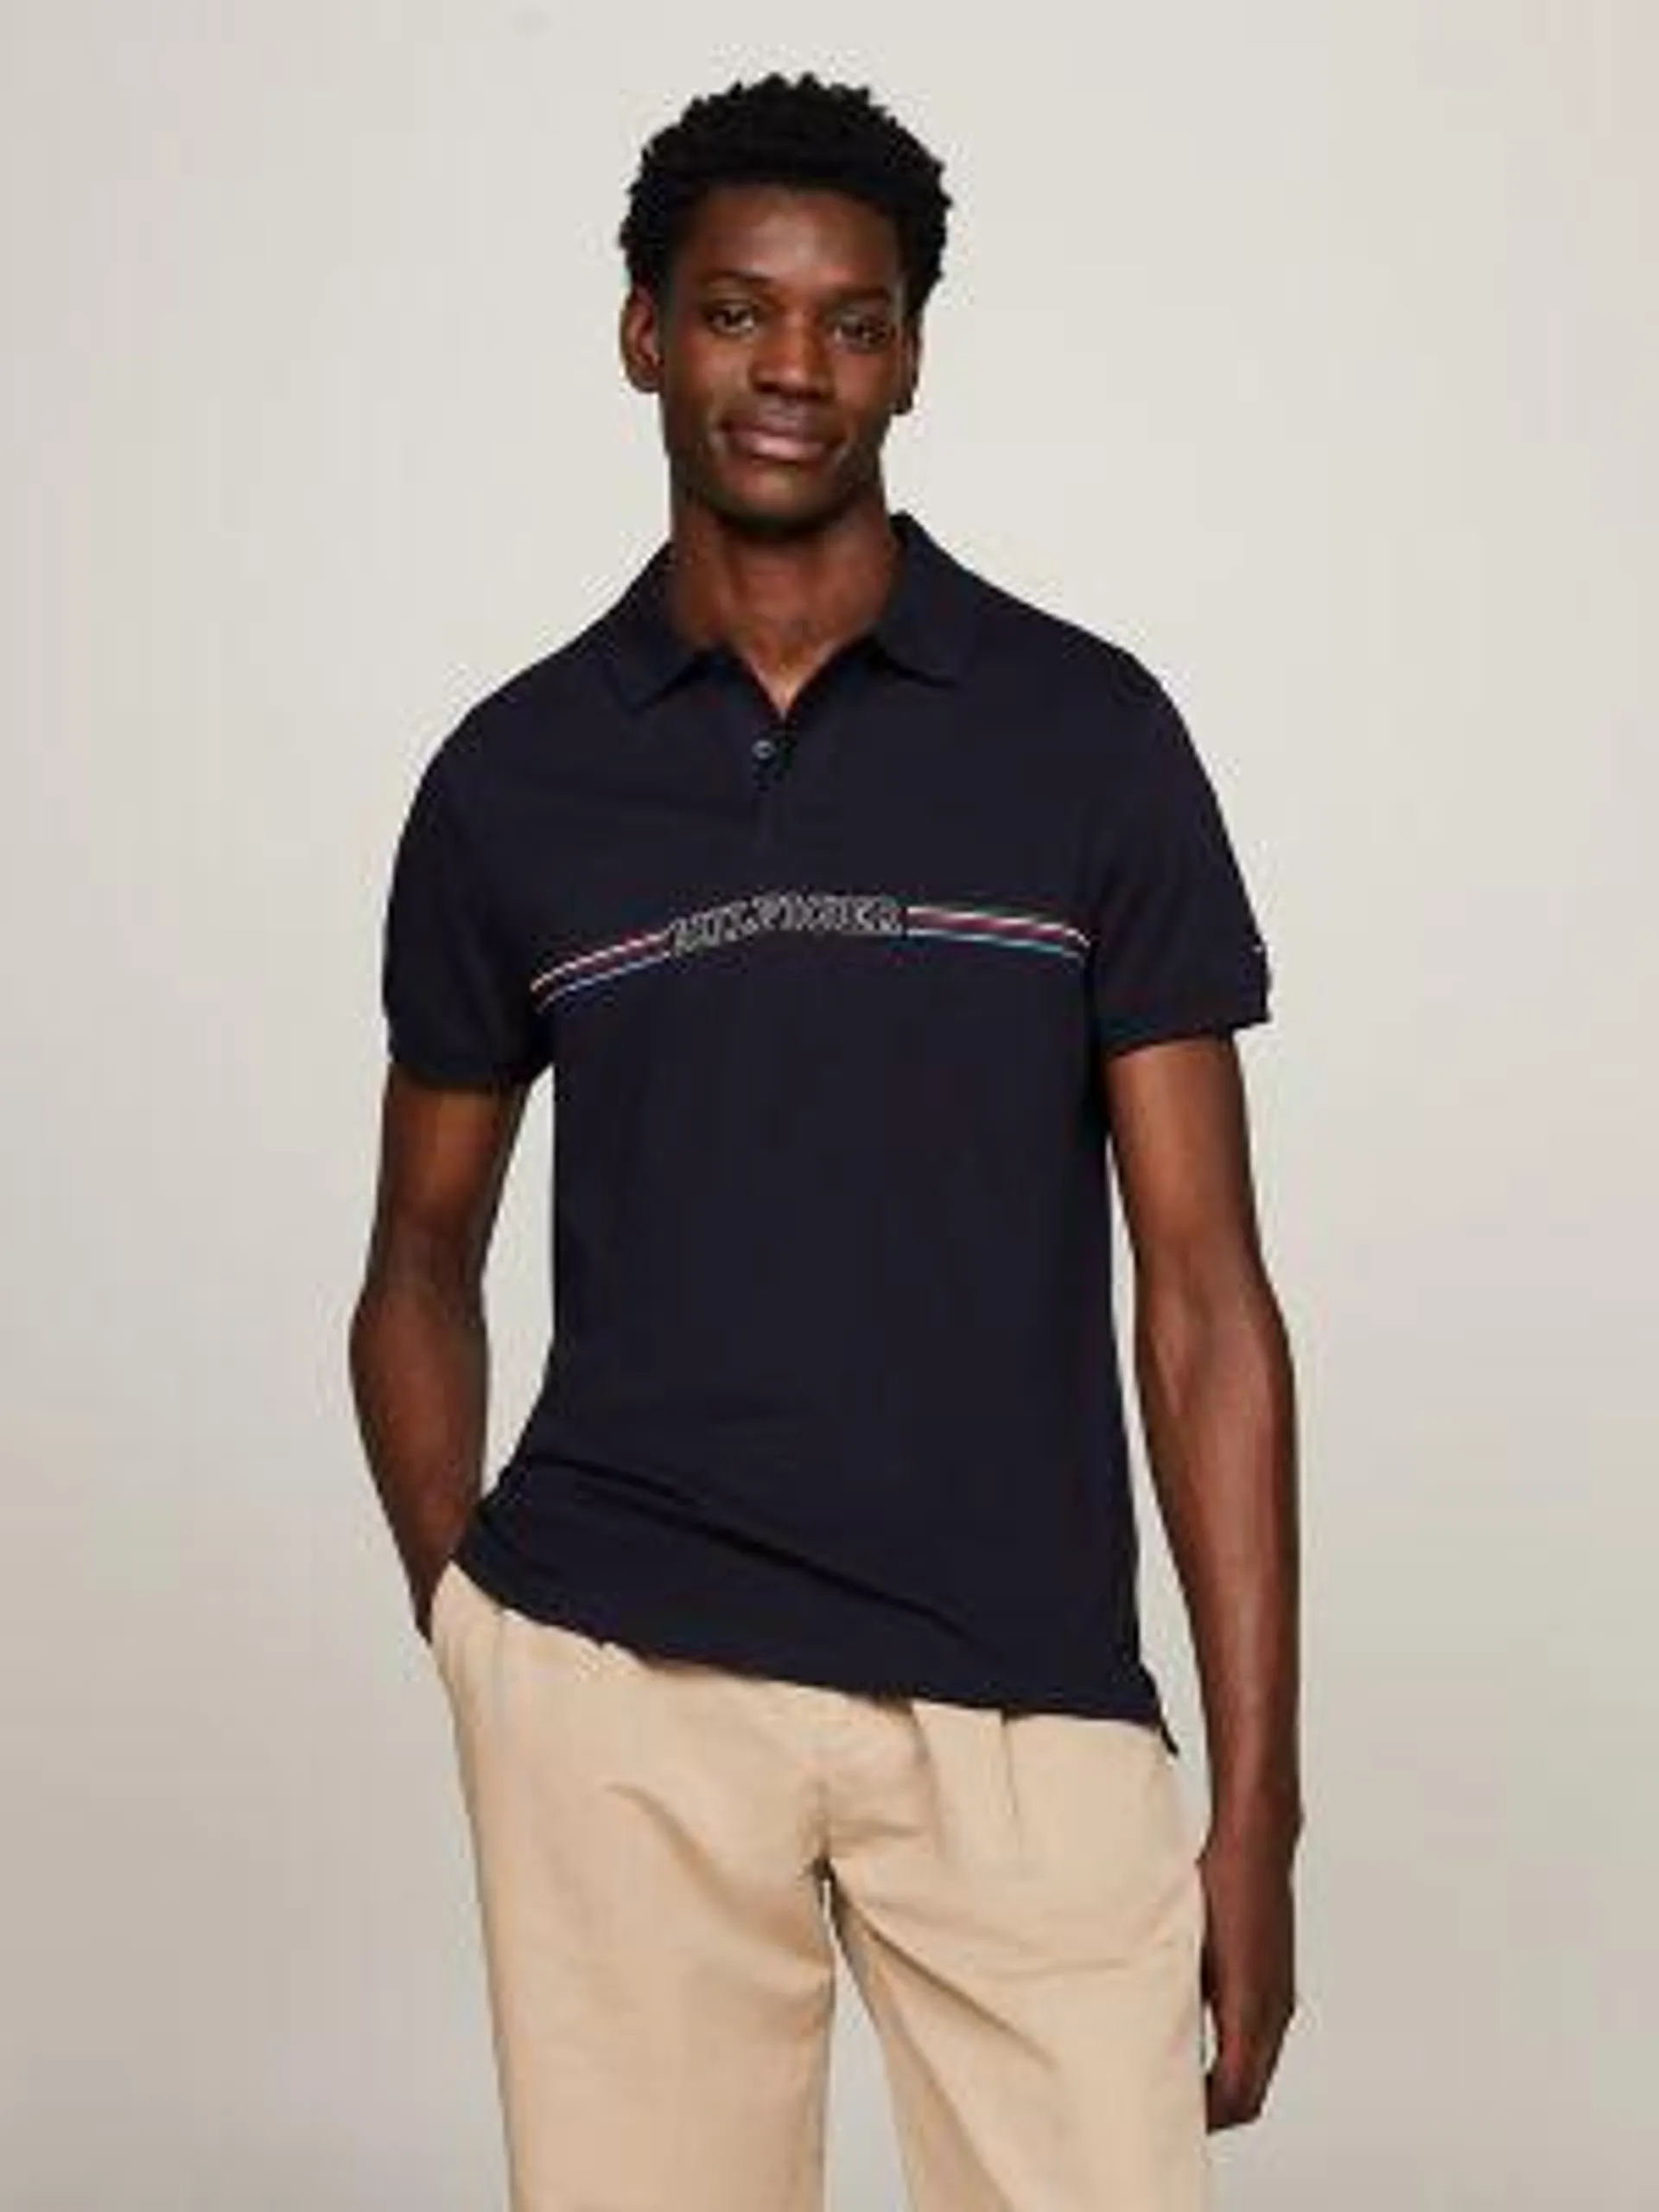 Regular Fit Monotype Chest Stripe Polo